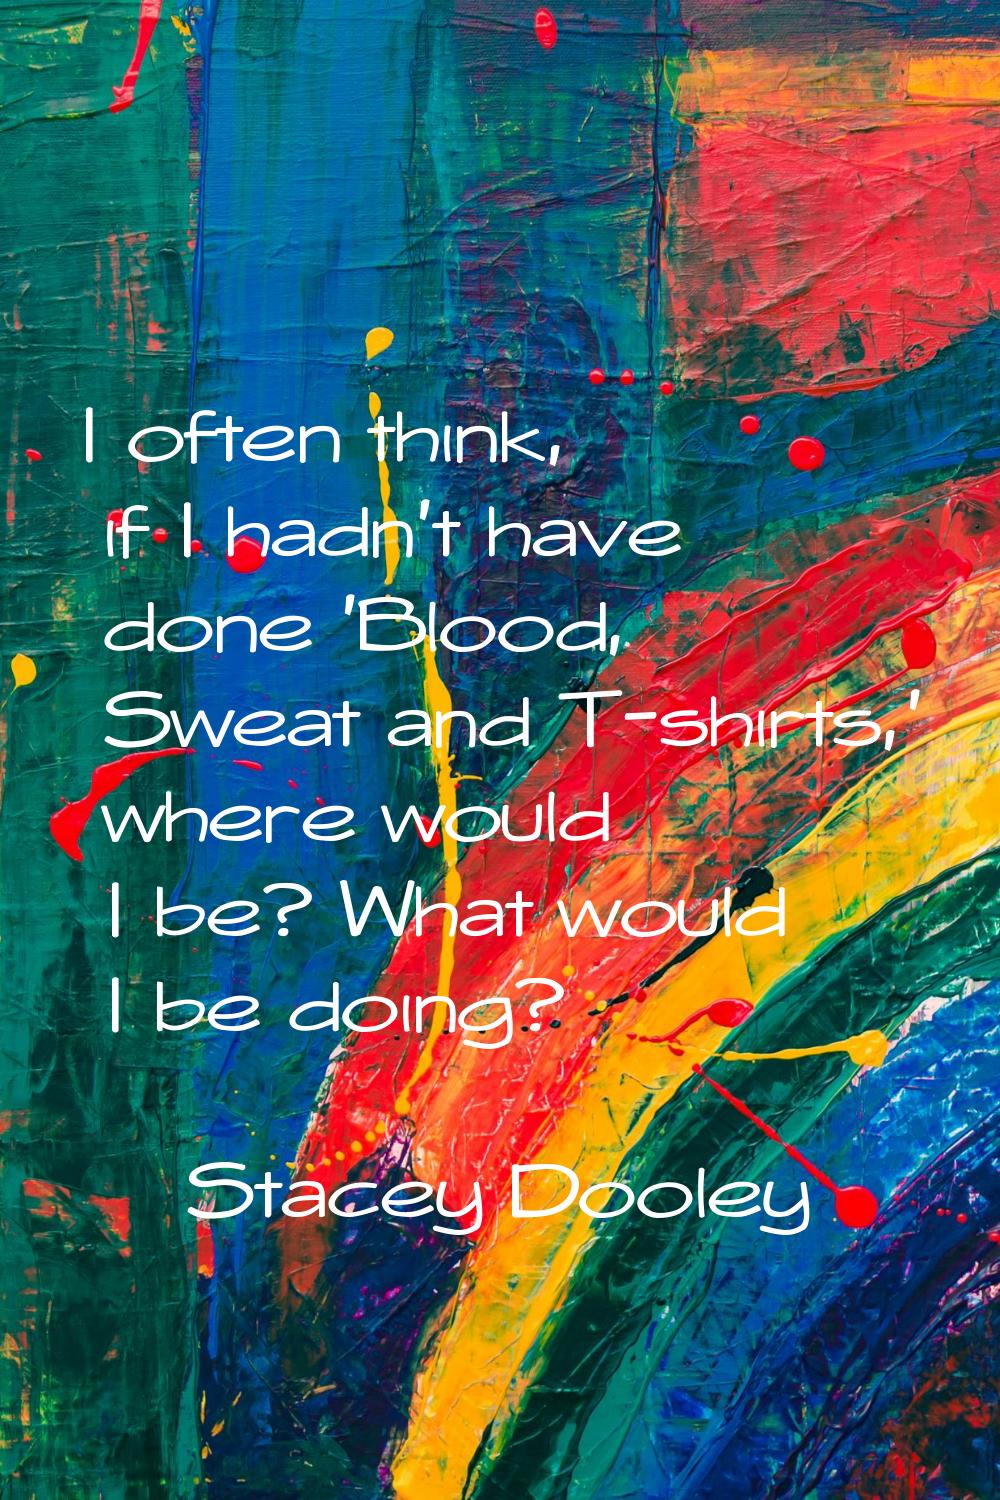 I often think, if I hadn't have done 'Blood, Sweat and T-shirts,' where would I be? What would I be